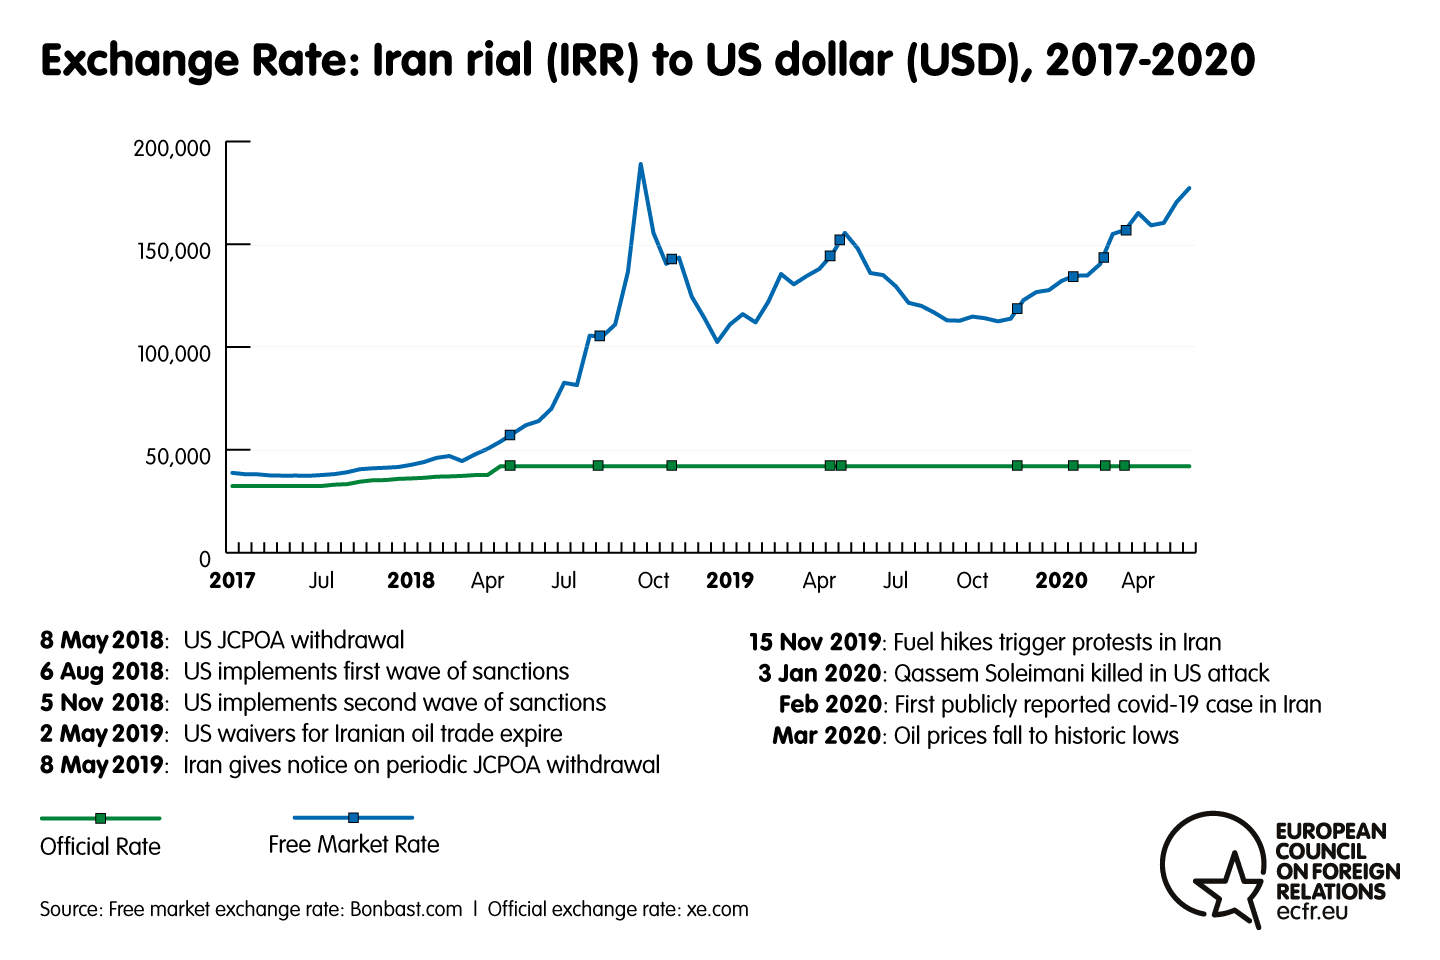 Chart of the exchange rate: Iran rial to US dollar, 2017-2020